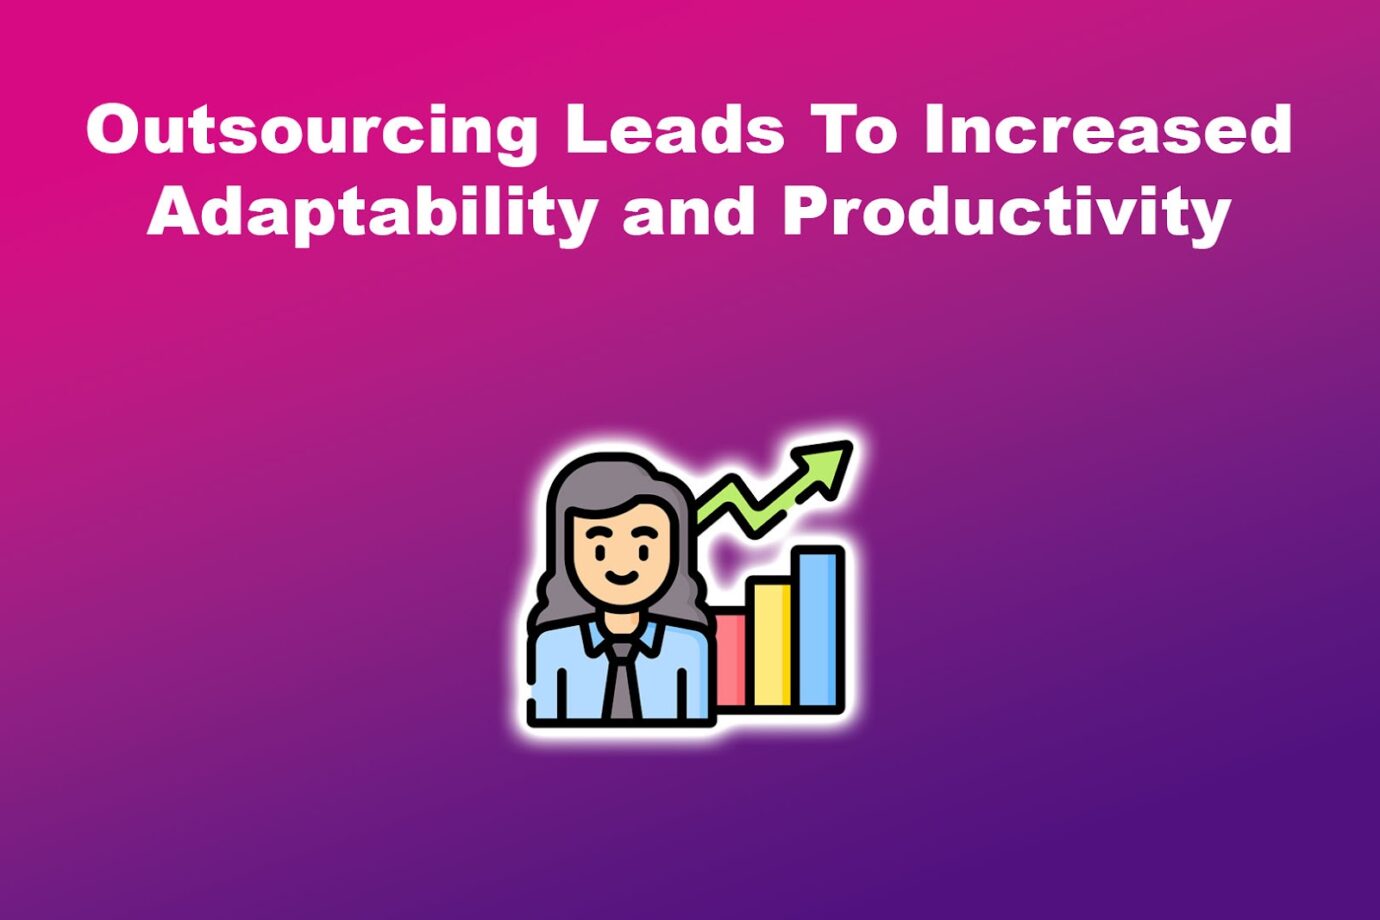 Outsourcing Leads To Increased Adaptability and Productivity